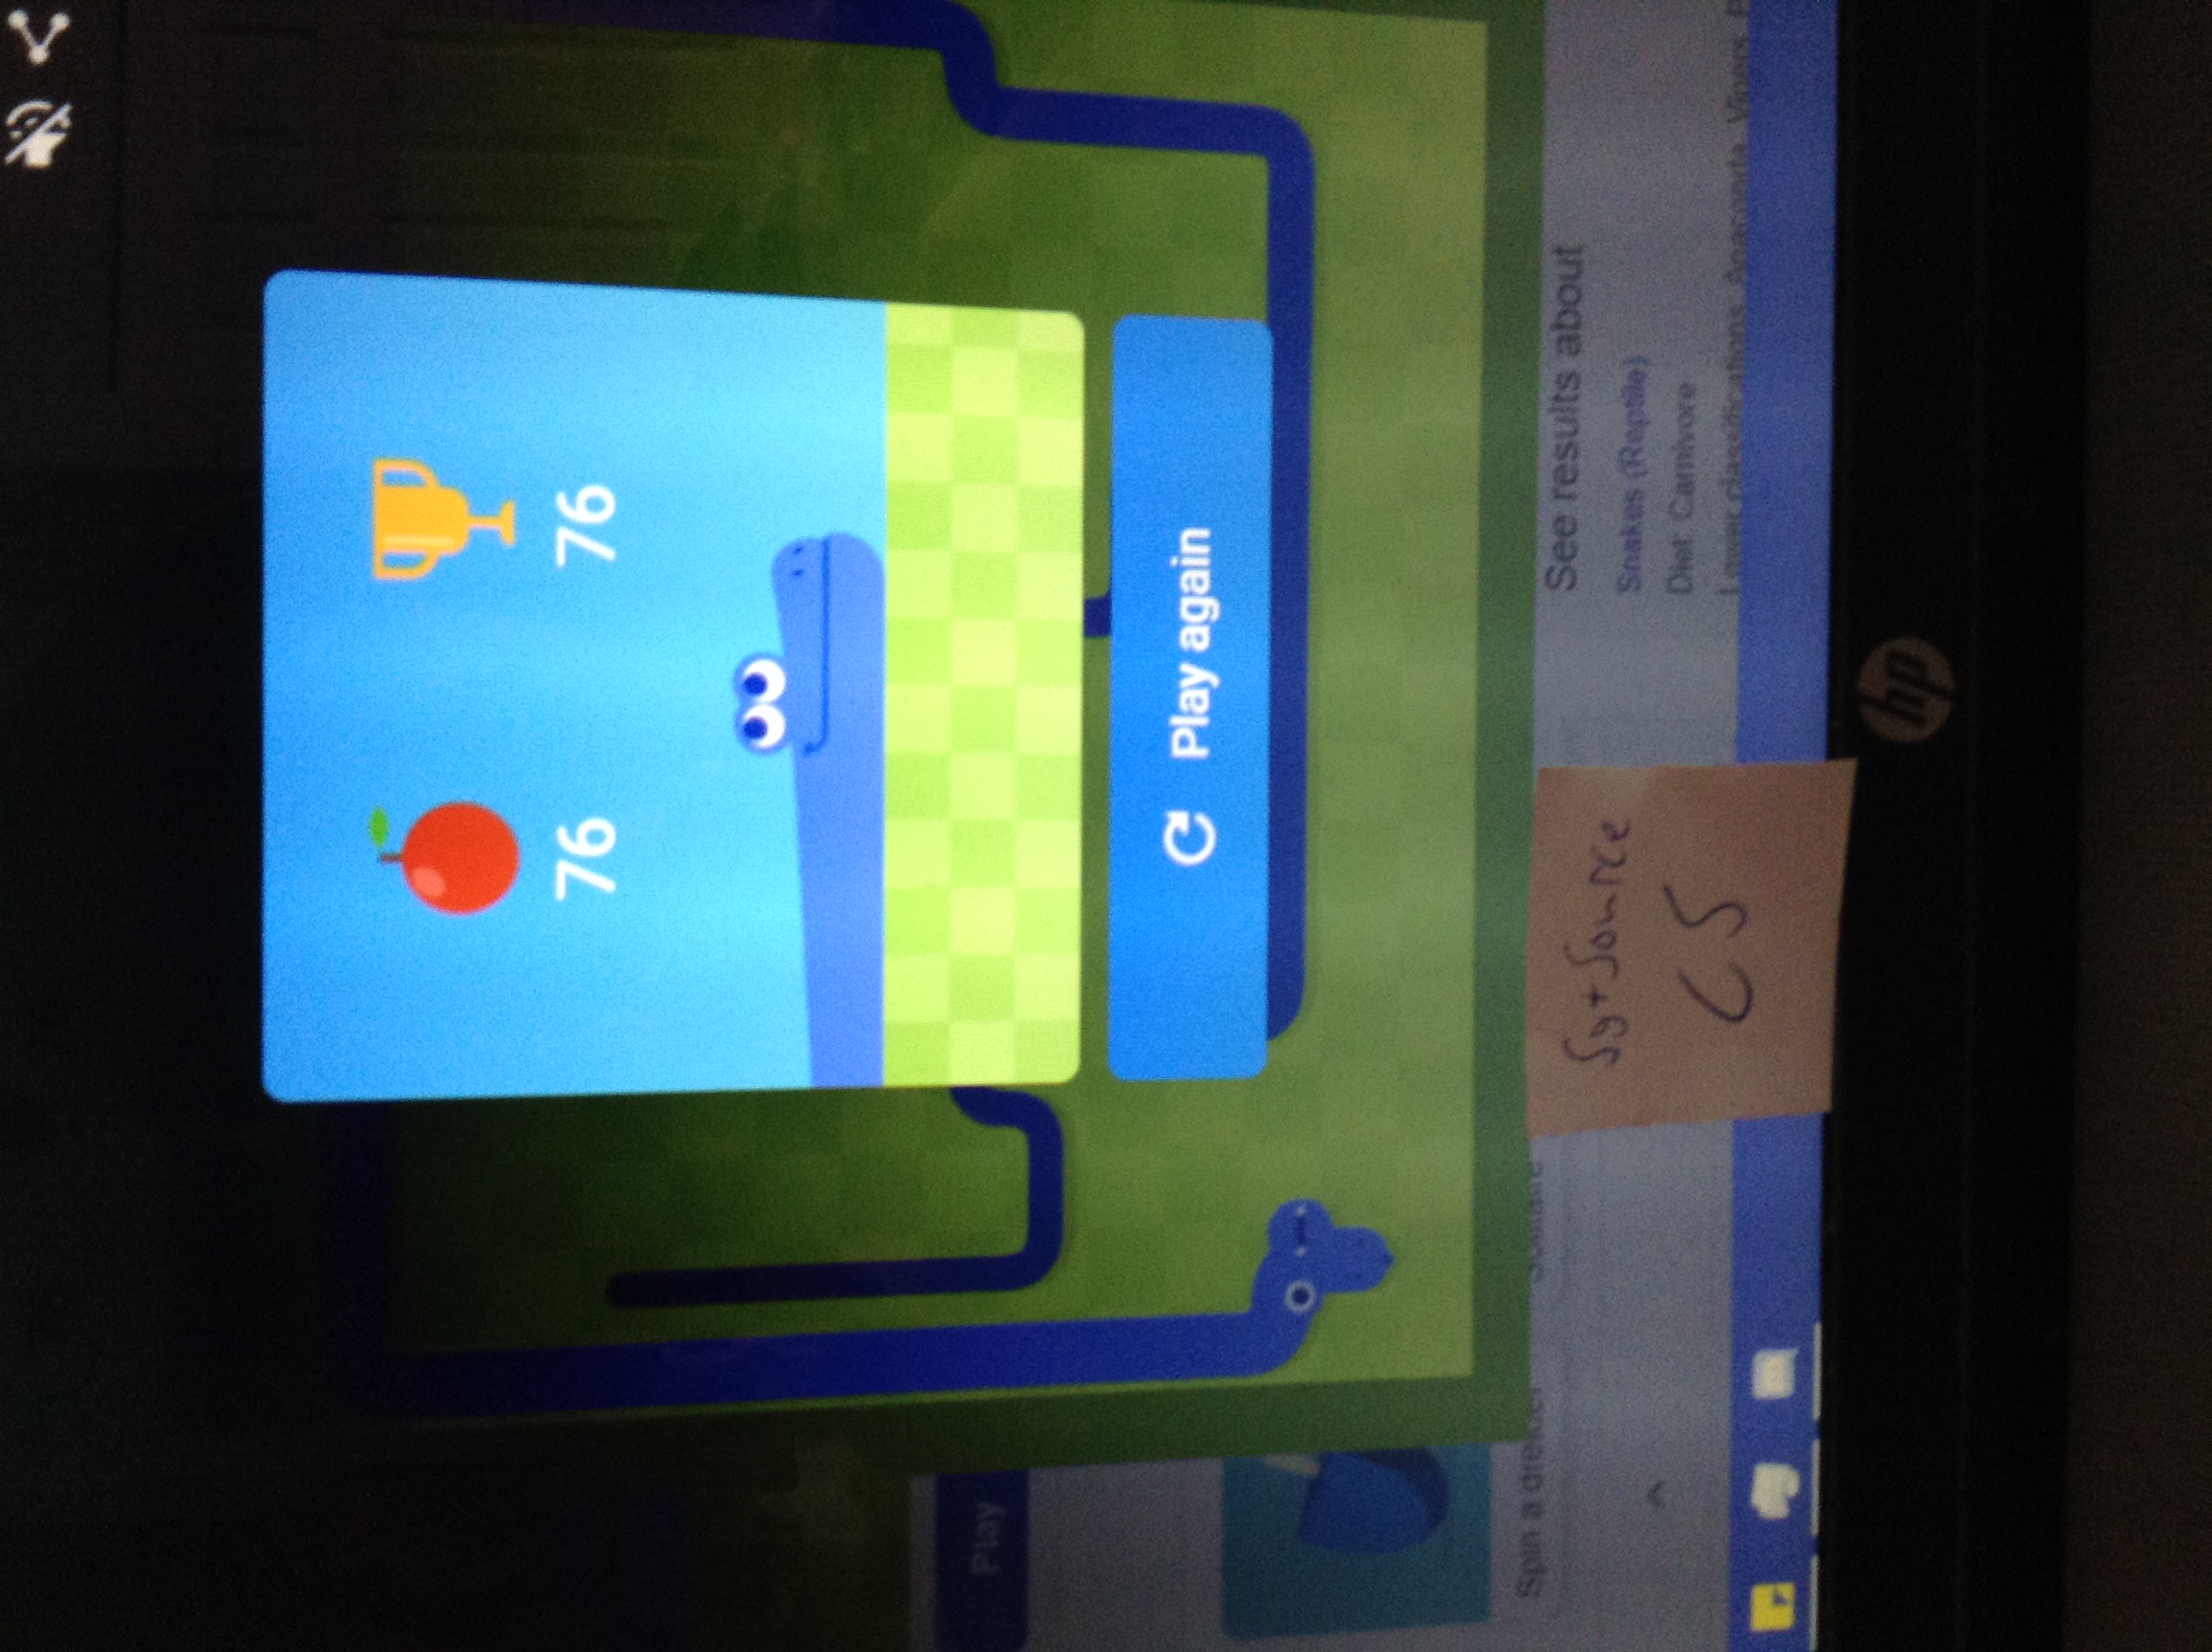 Do you know the google snake game??? Well look at my high score please.